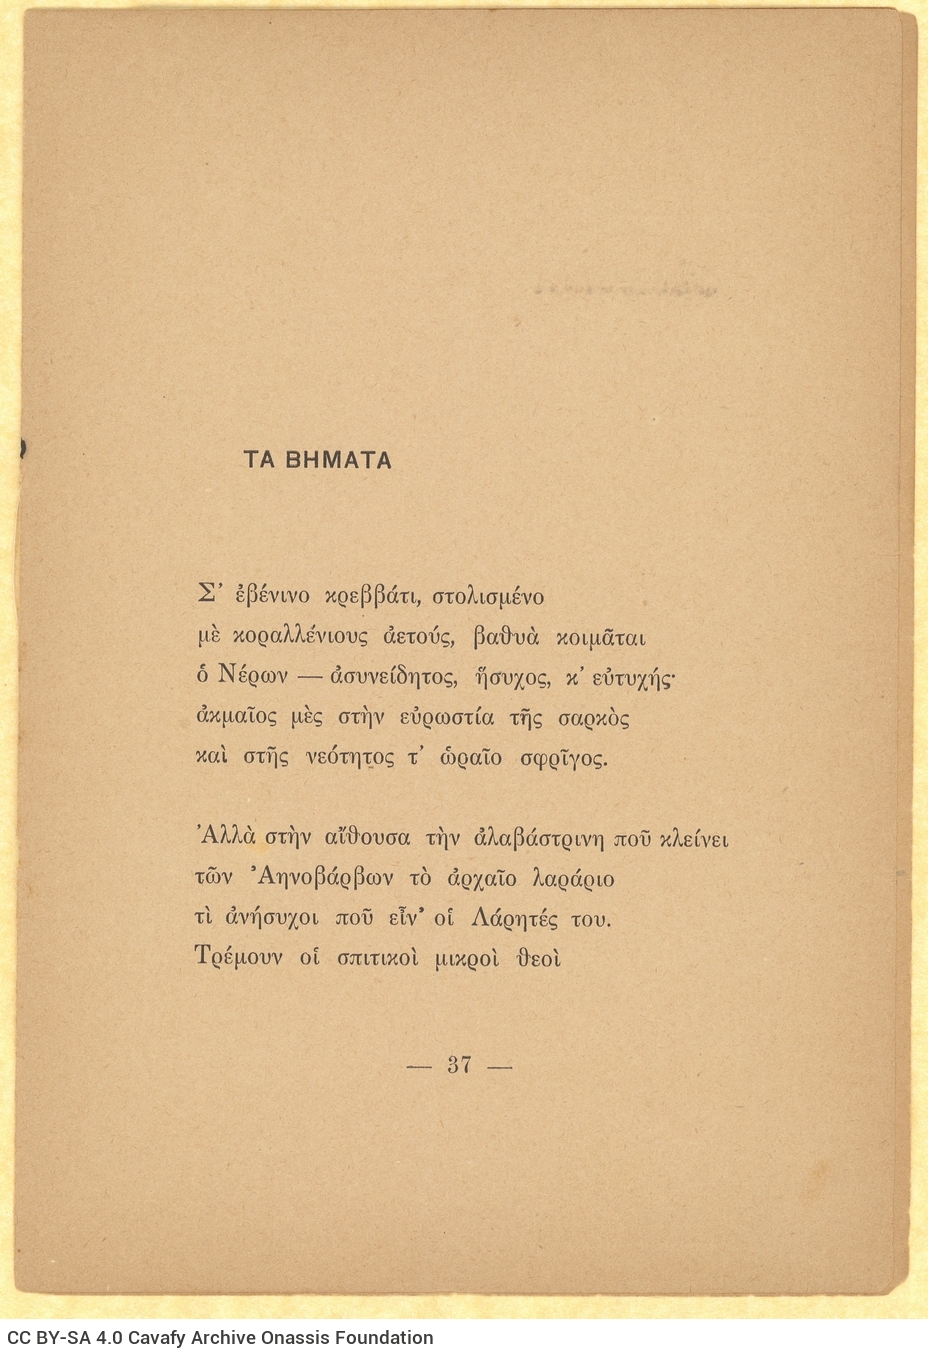 Four sheets from a printed poetry collection by Cavafy with page numbering 33-39 (the last one [40] without page numbering